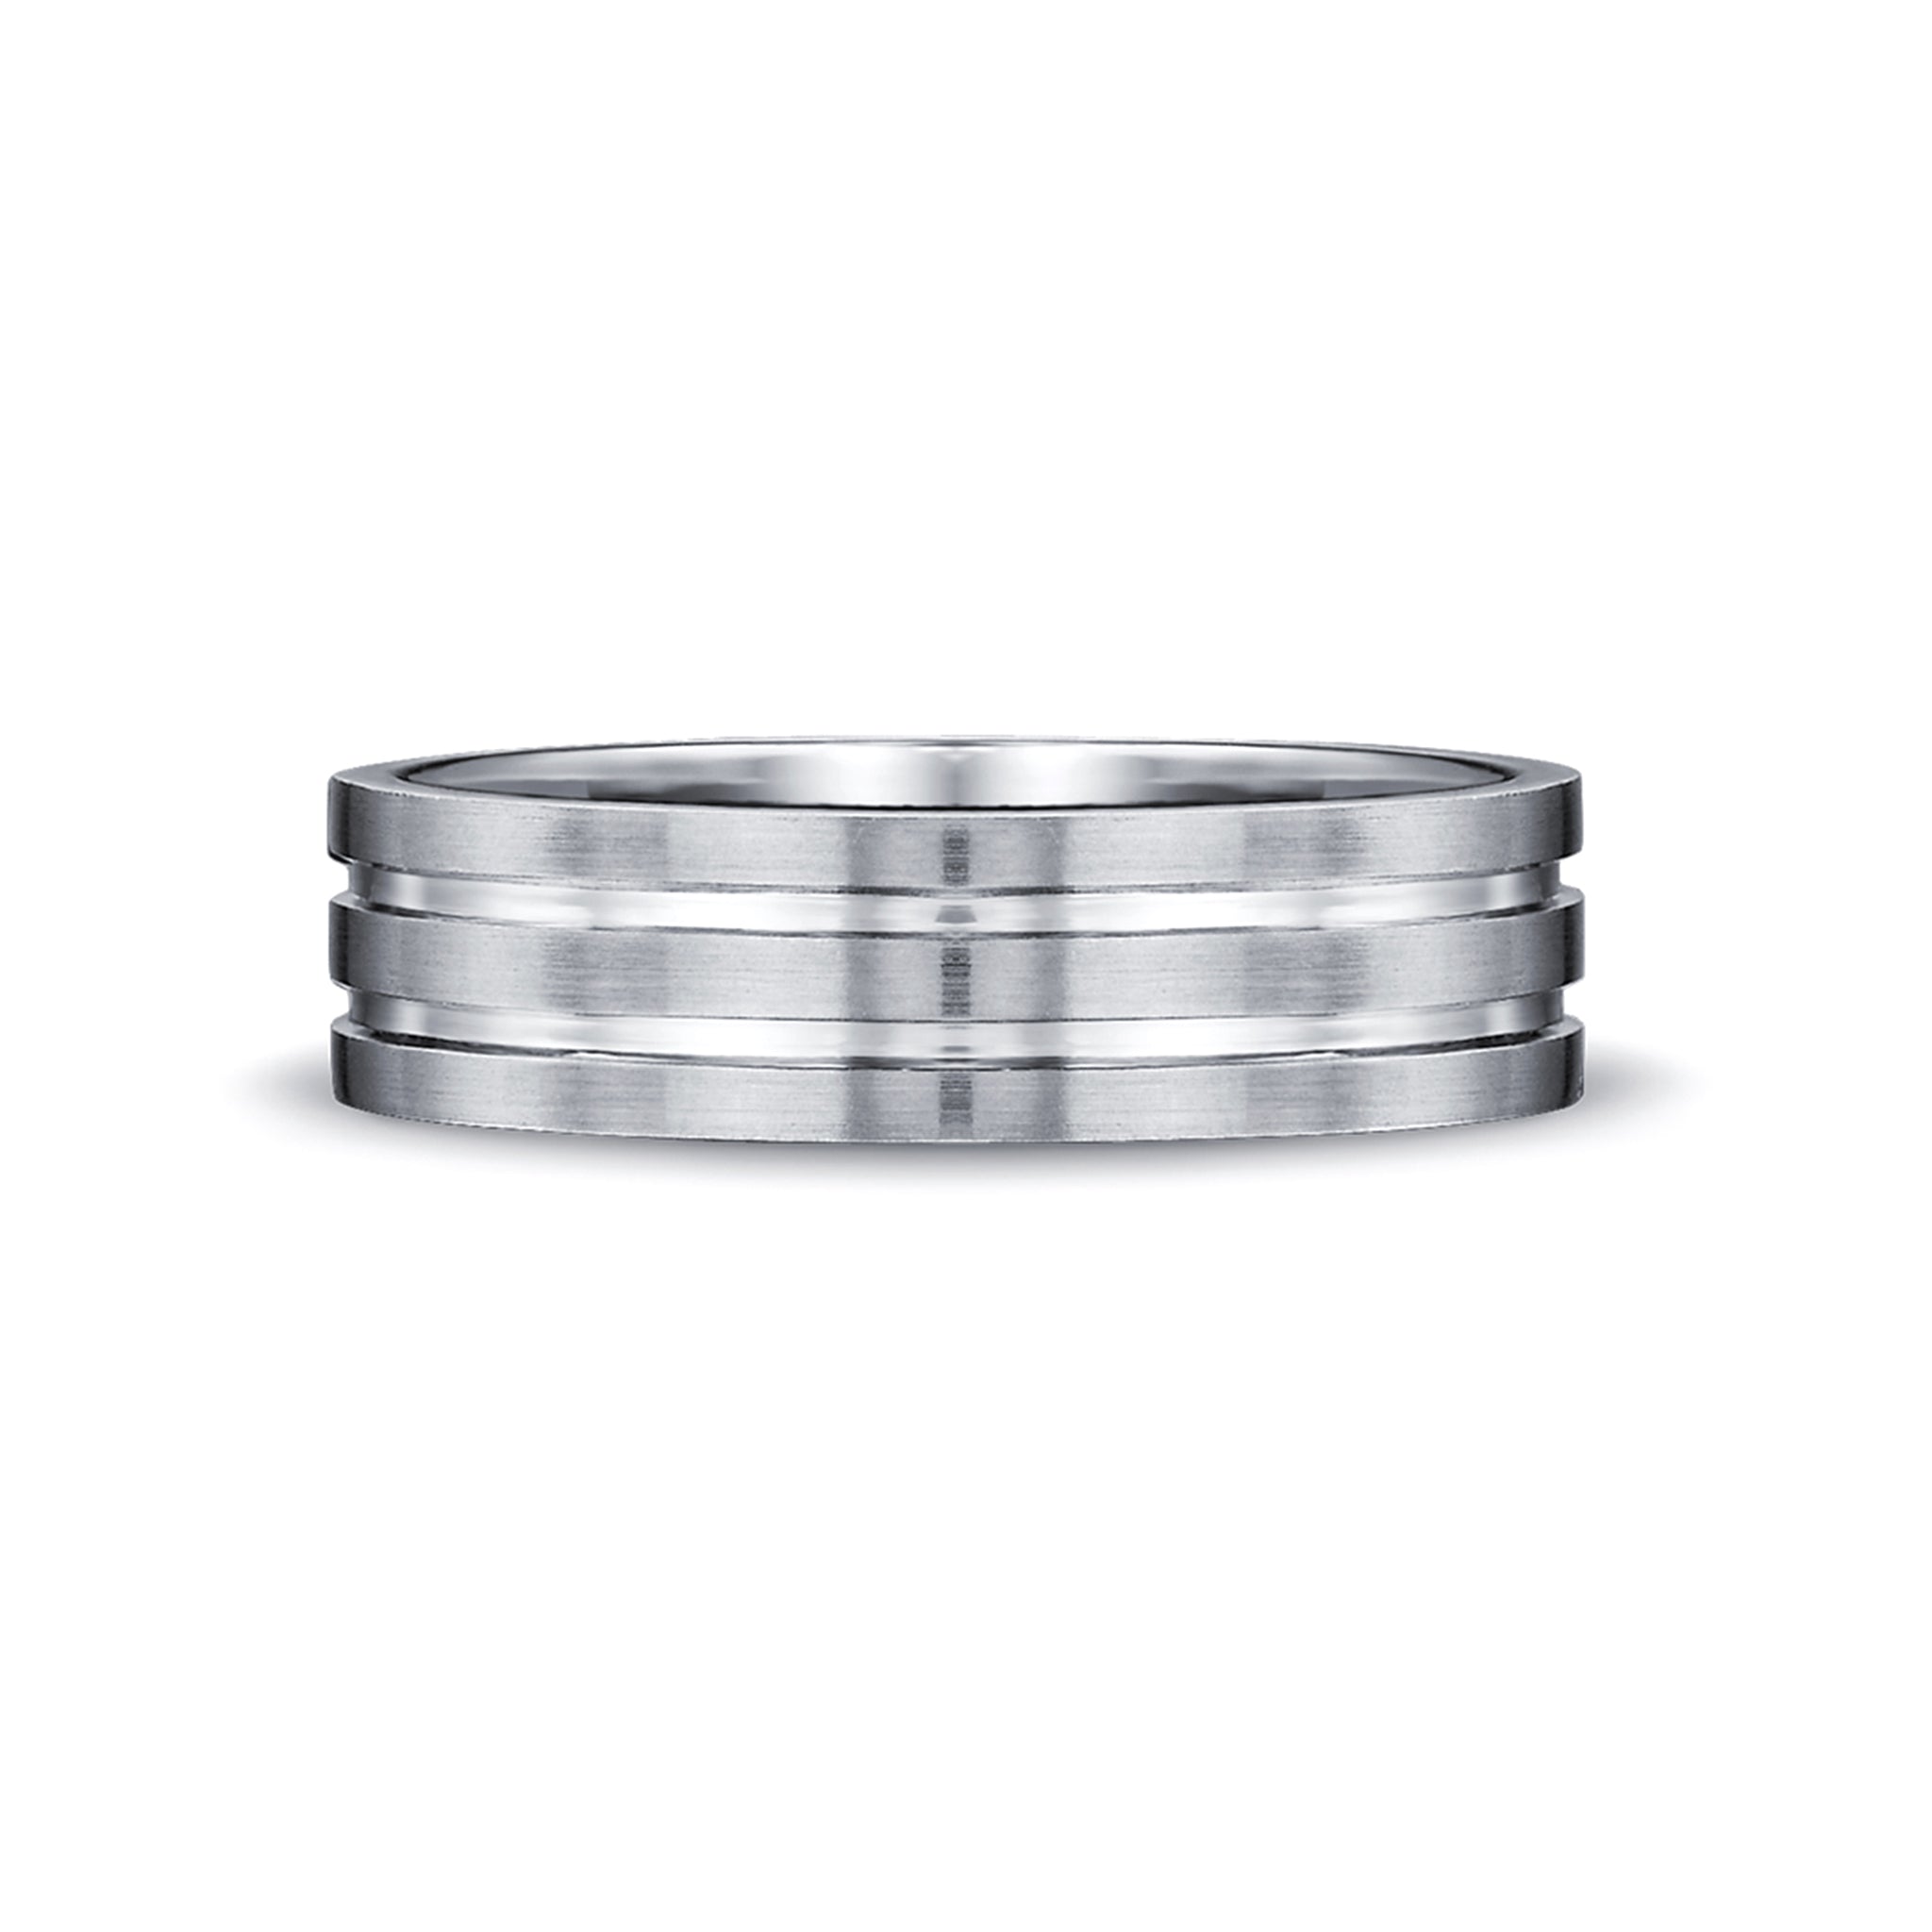 Shimansky - Max-line Flat Double Grooved Wedding Band in Satin Finished Palladium